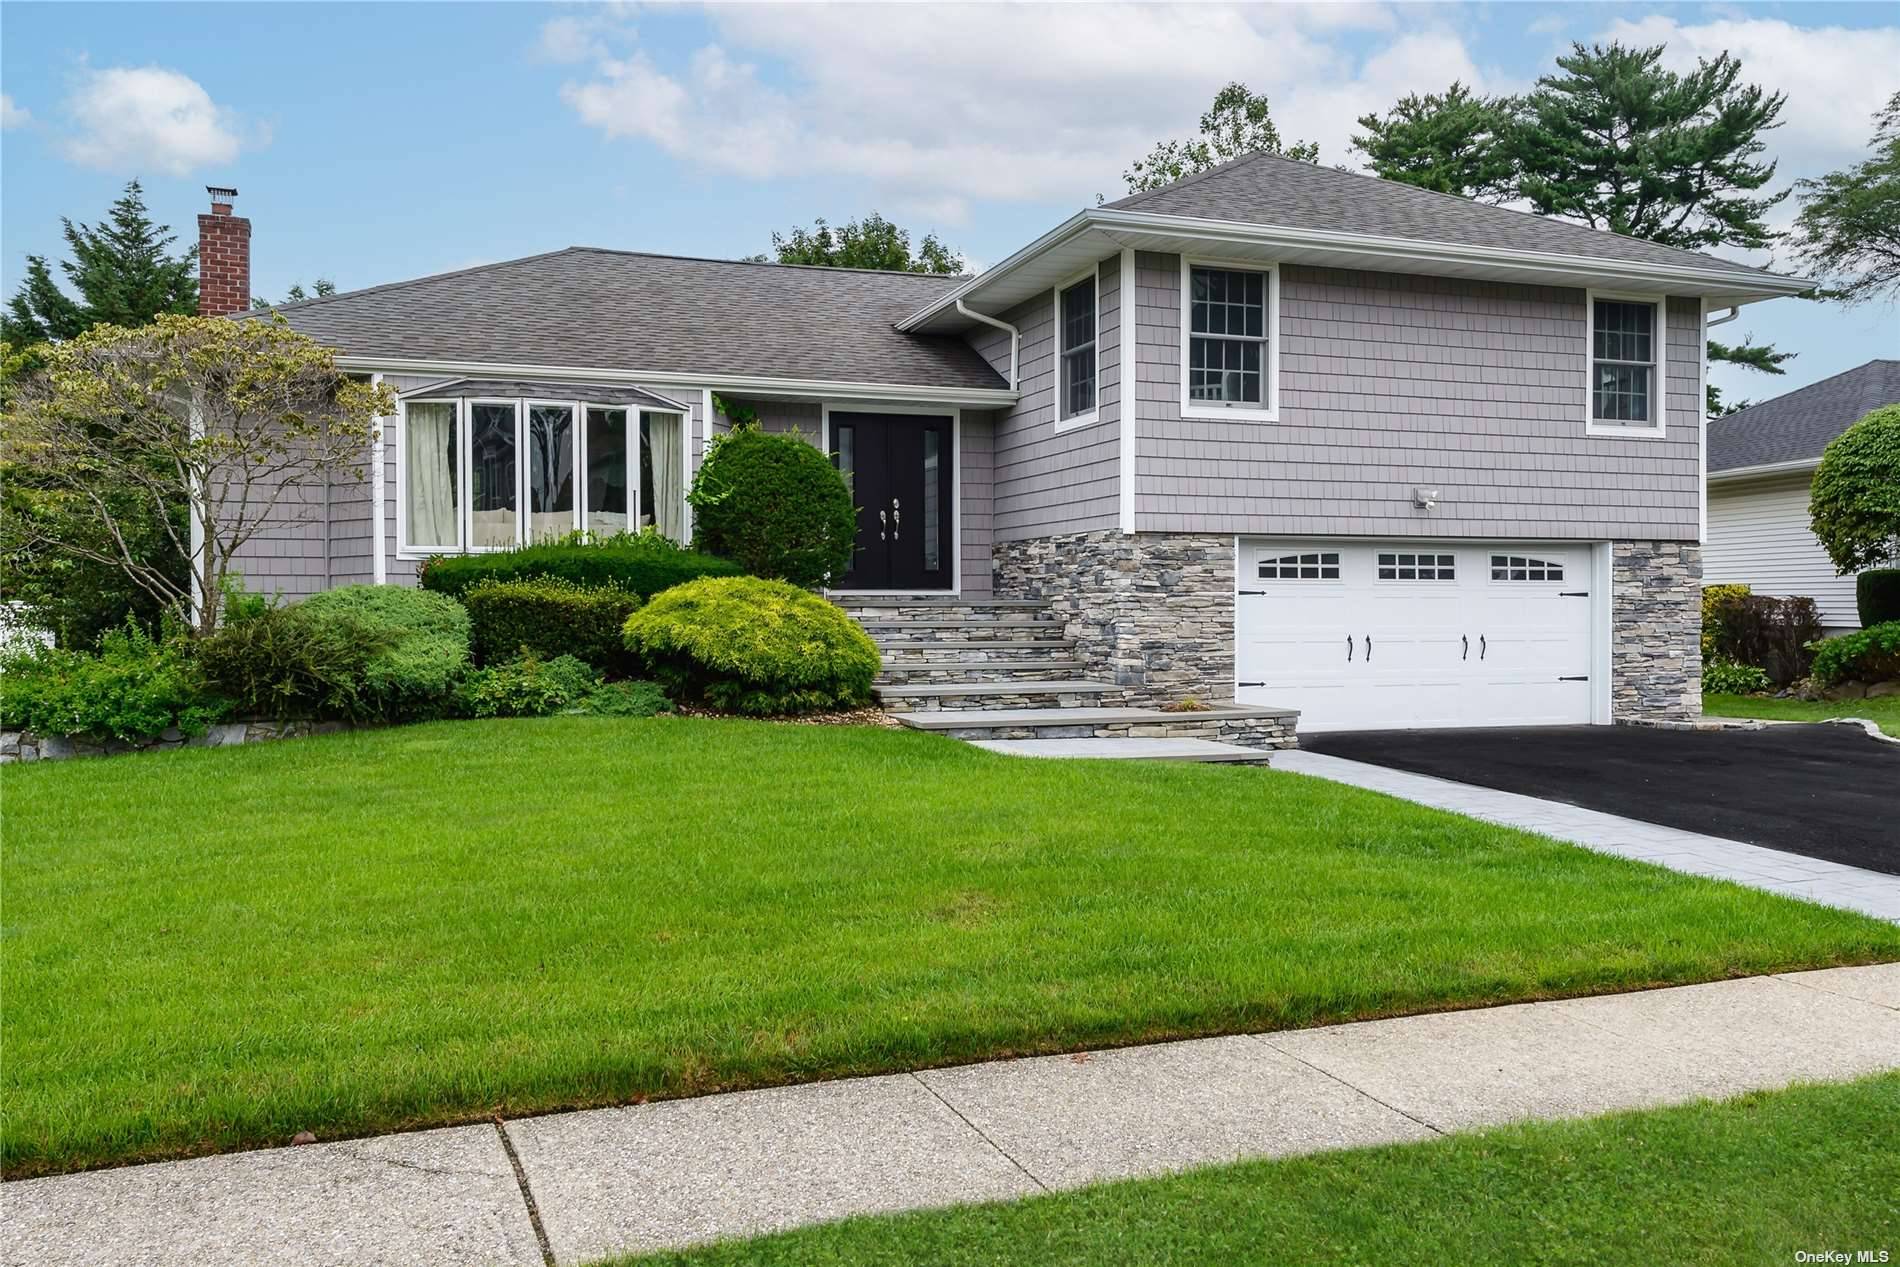 This stunning Split Level home is located in the heart of Syosset and offers an array of luxurious features and upgrades.